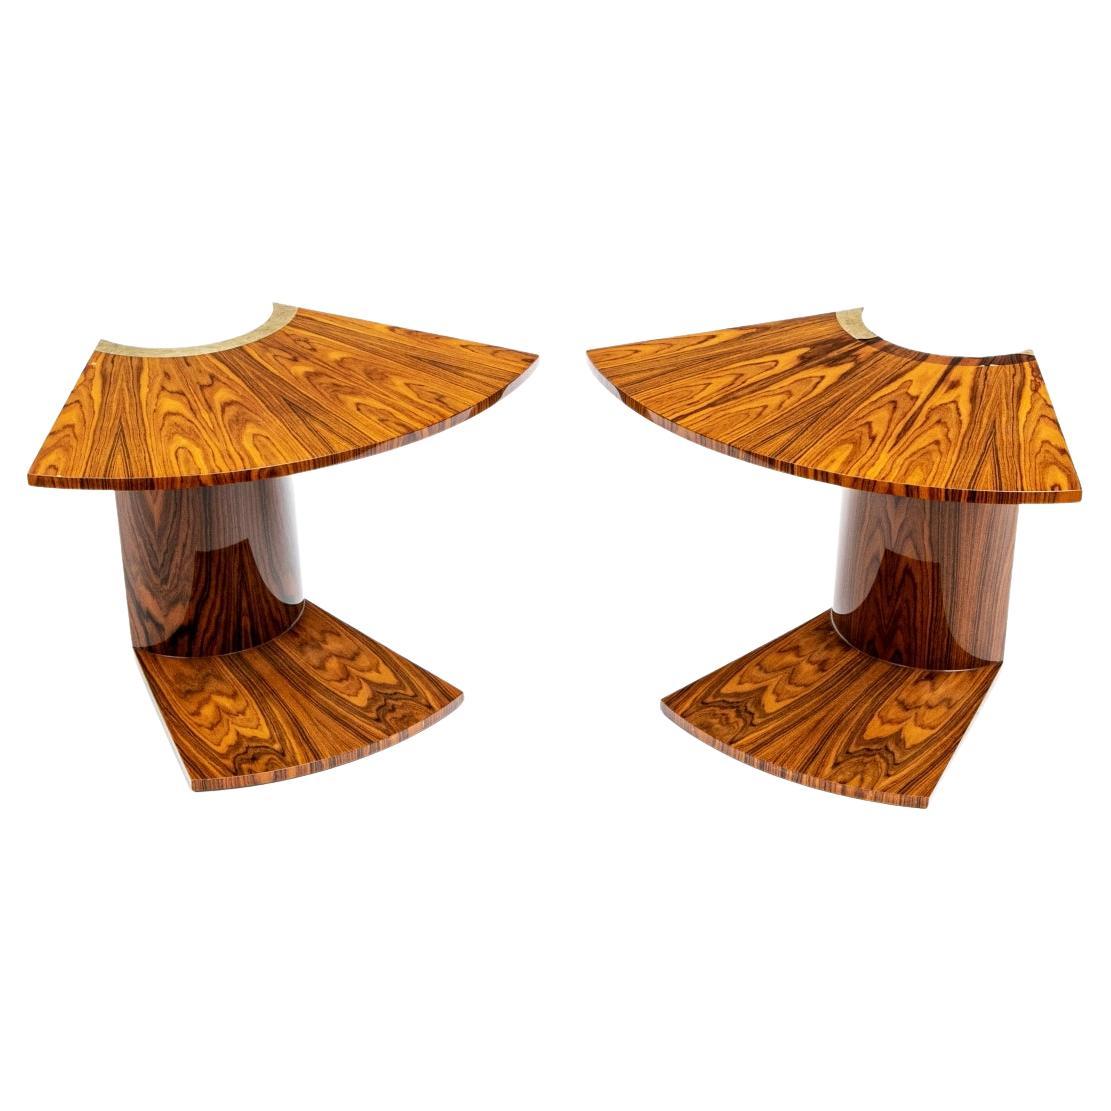 Pair of Wedge Shaped Zebra Wood Patterned End Tables for Restoration 